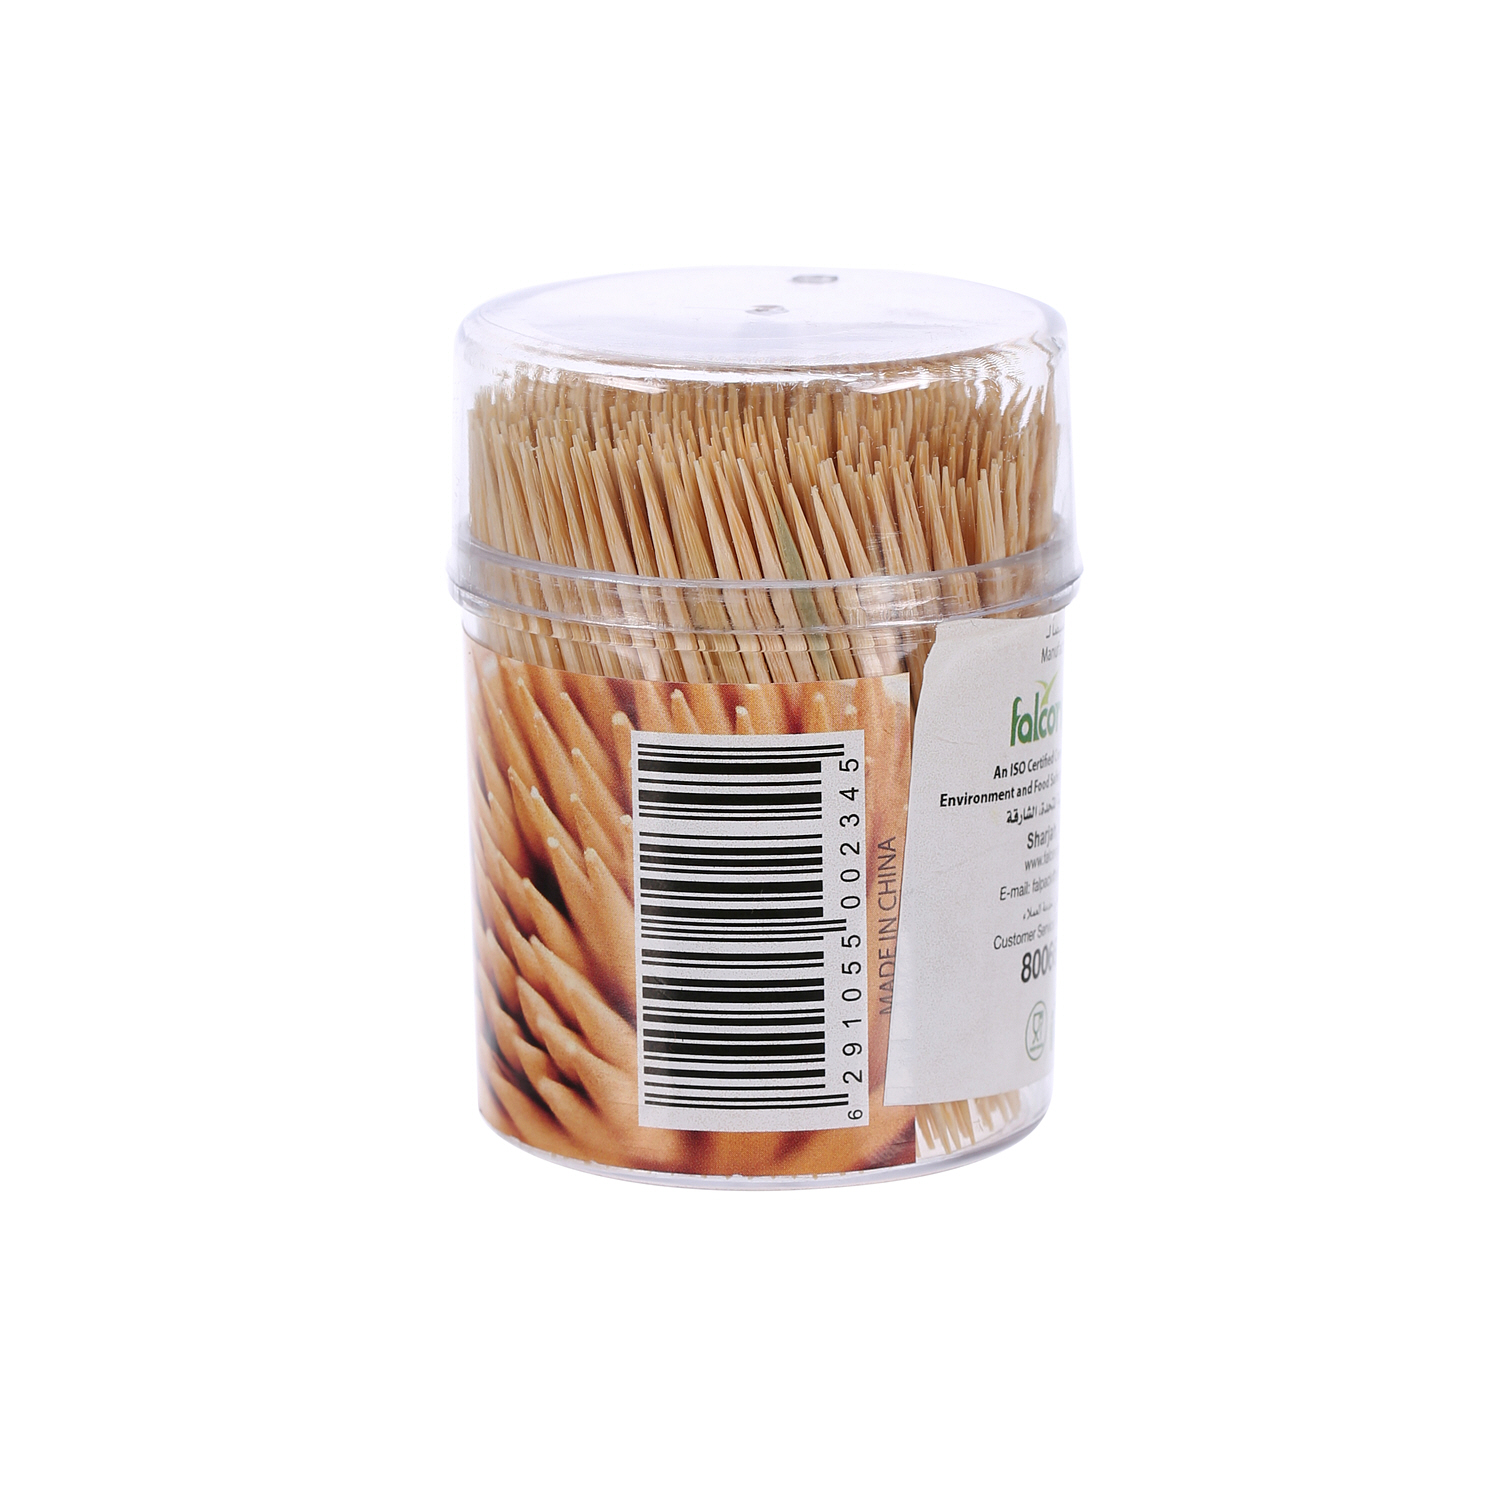 Falcon Toothpicks 500 Pack